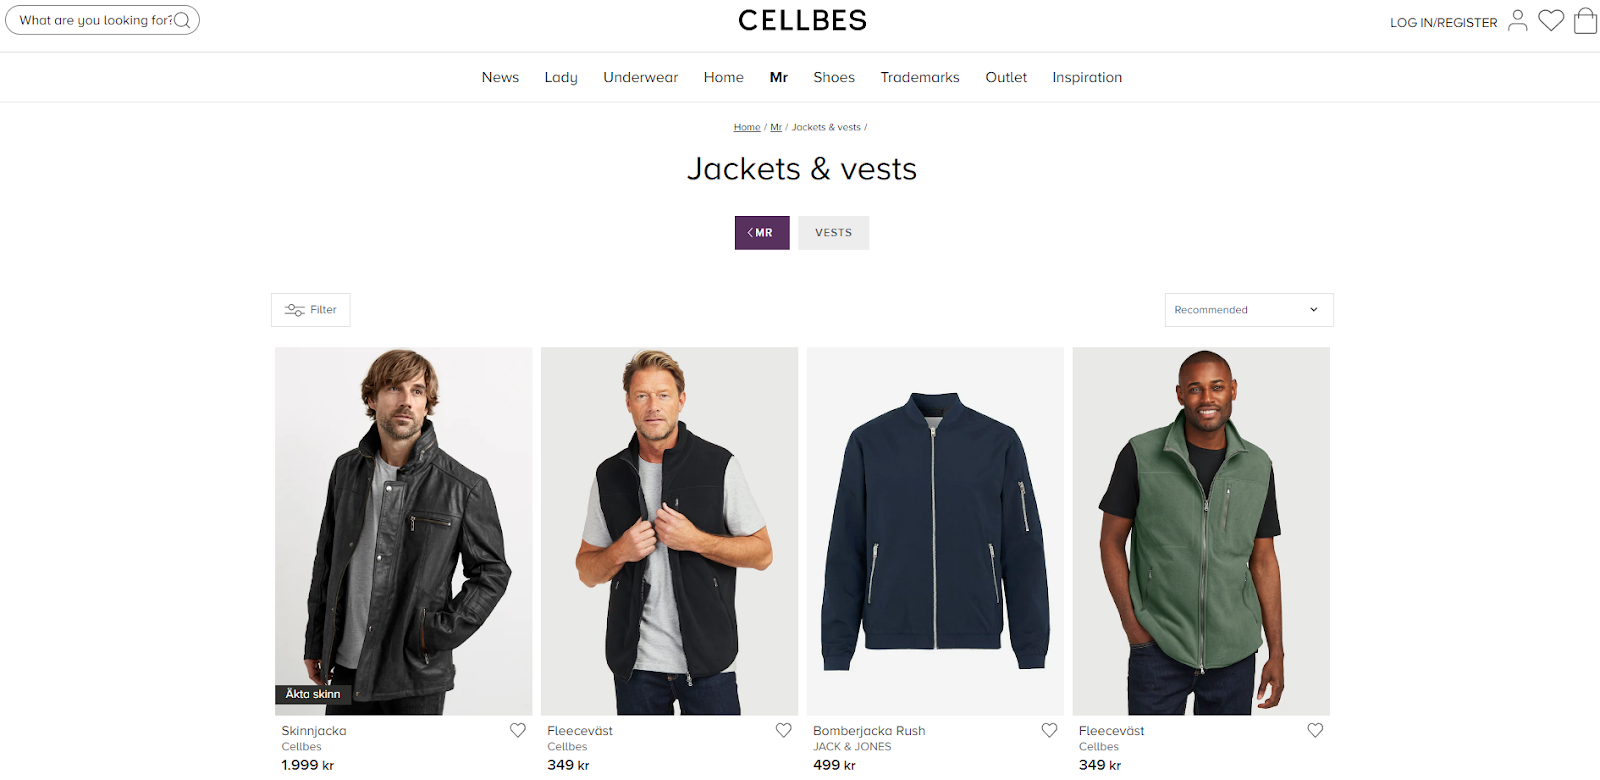 Cellbes: Read This Before You Buy Something | Cloud Retouch